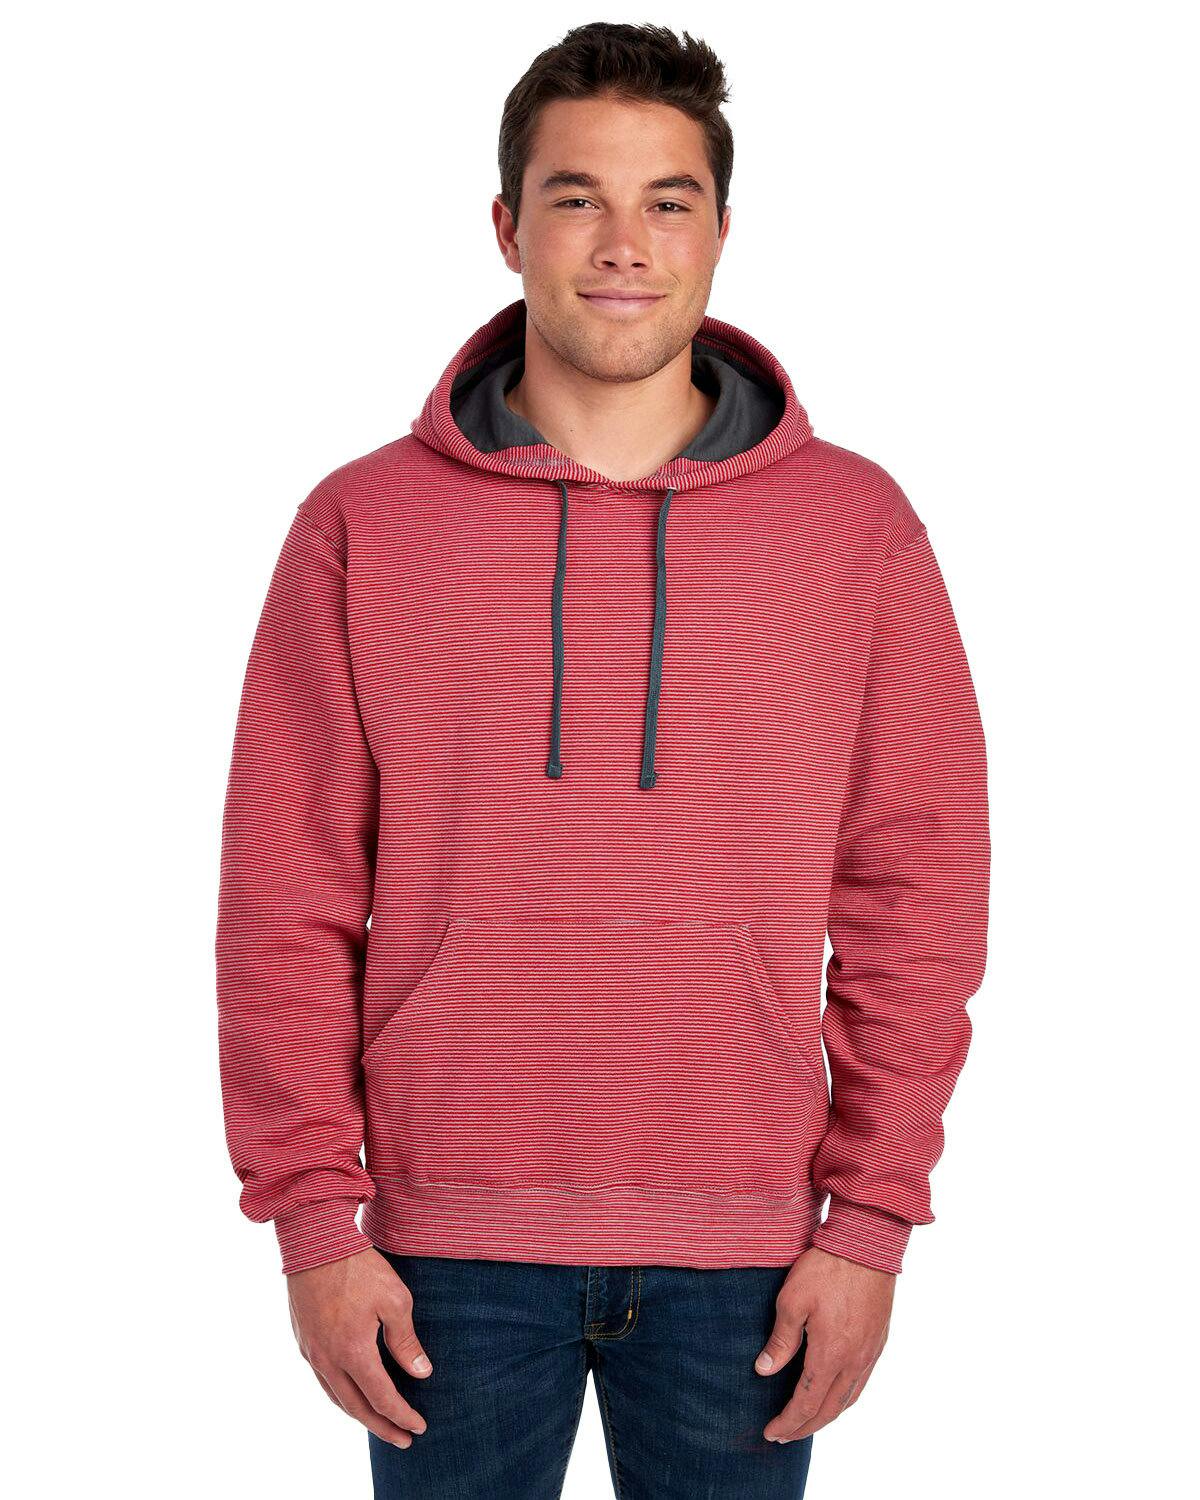 Image for Adult Sofspun® Striped Hooded Sweatshirt